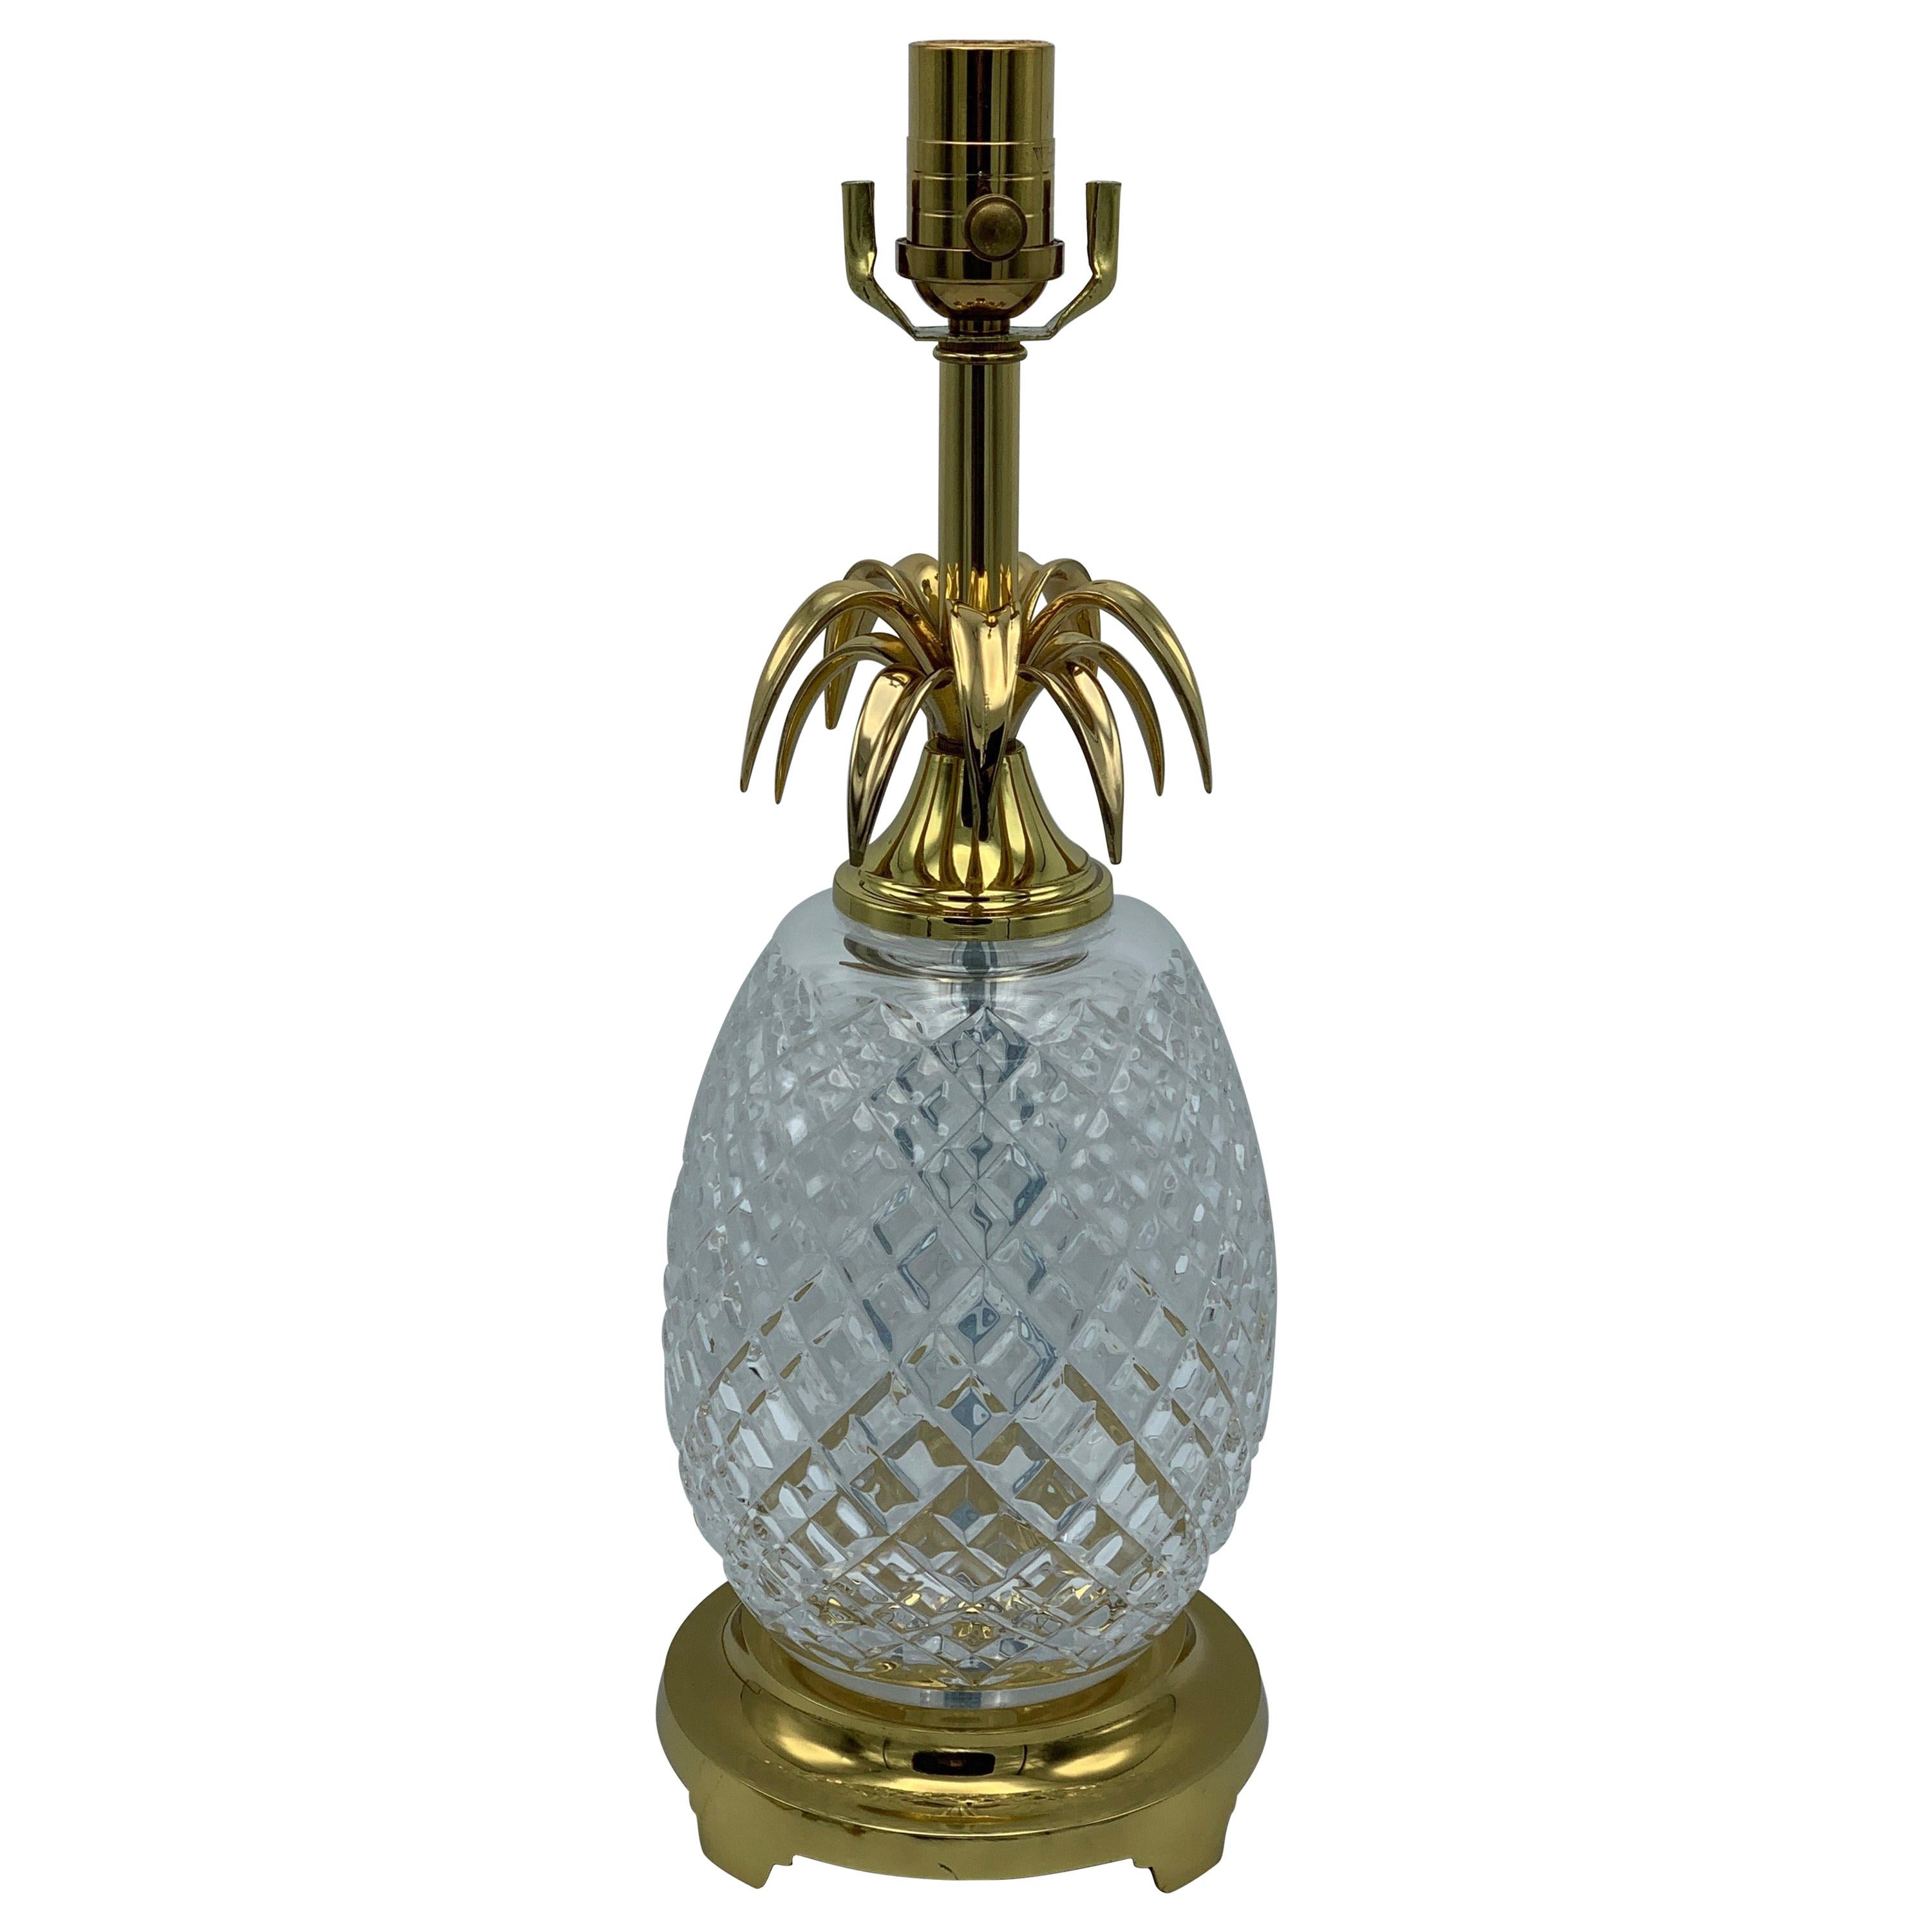 1980s Waterford Crystal and Brass Pineapple Lamp